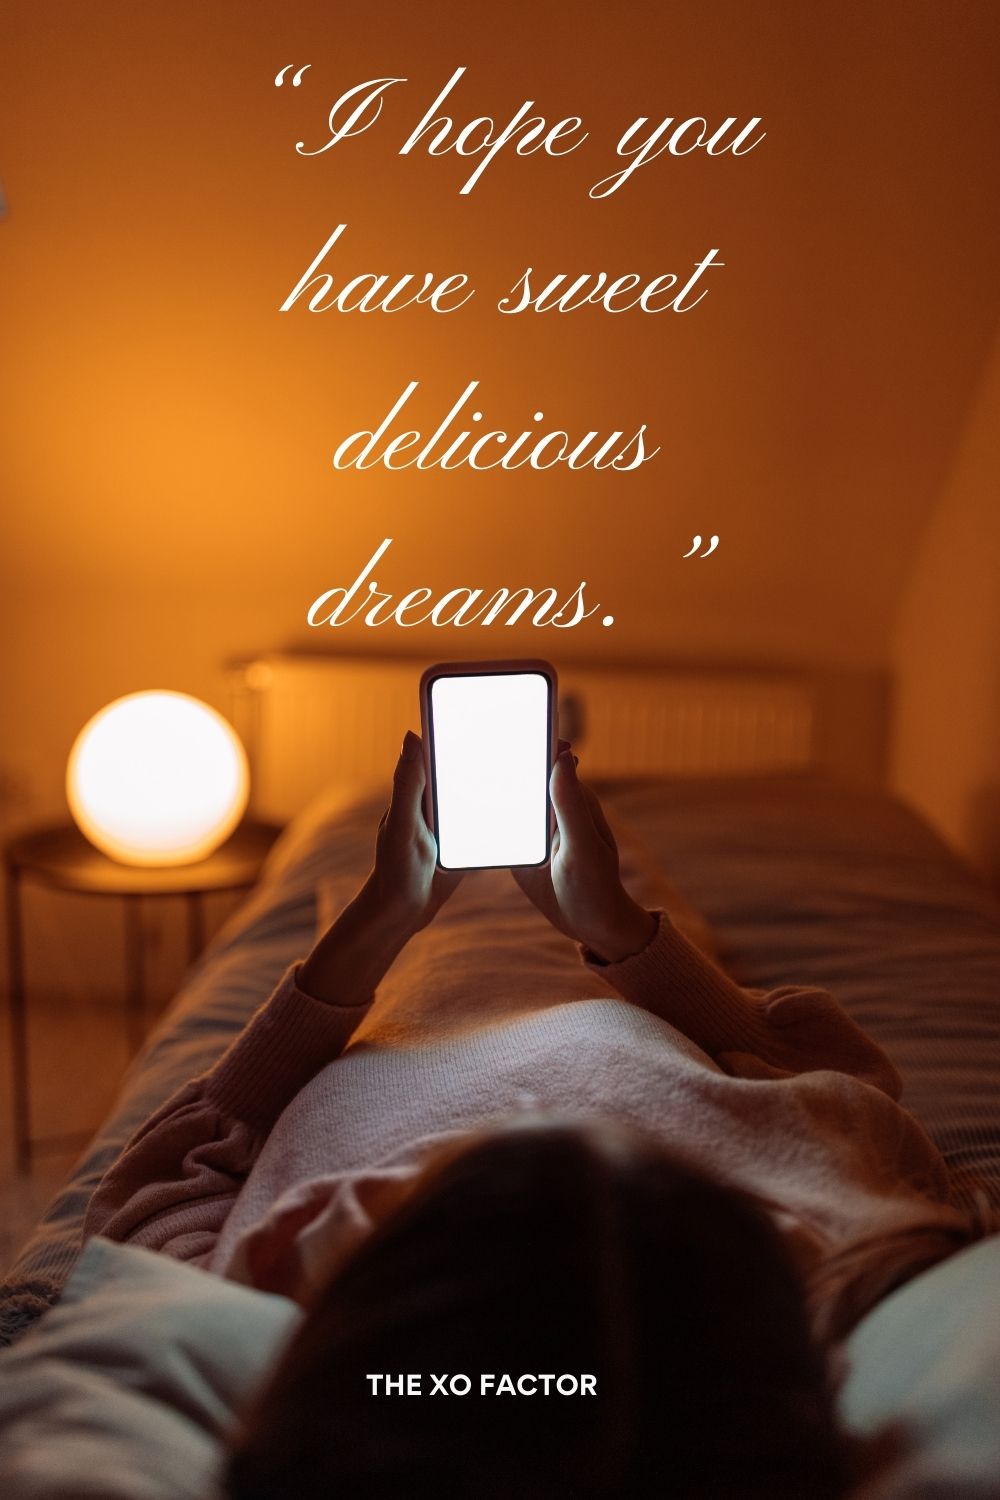 “I hope you have sweet delicious dreams.”